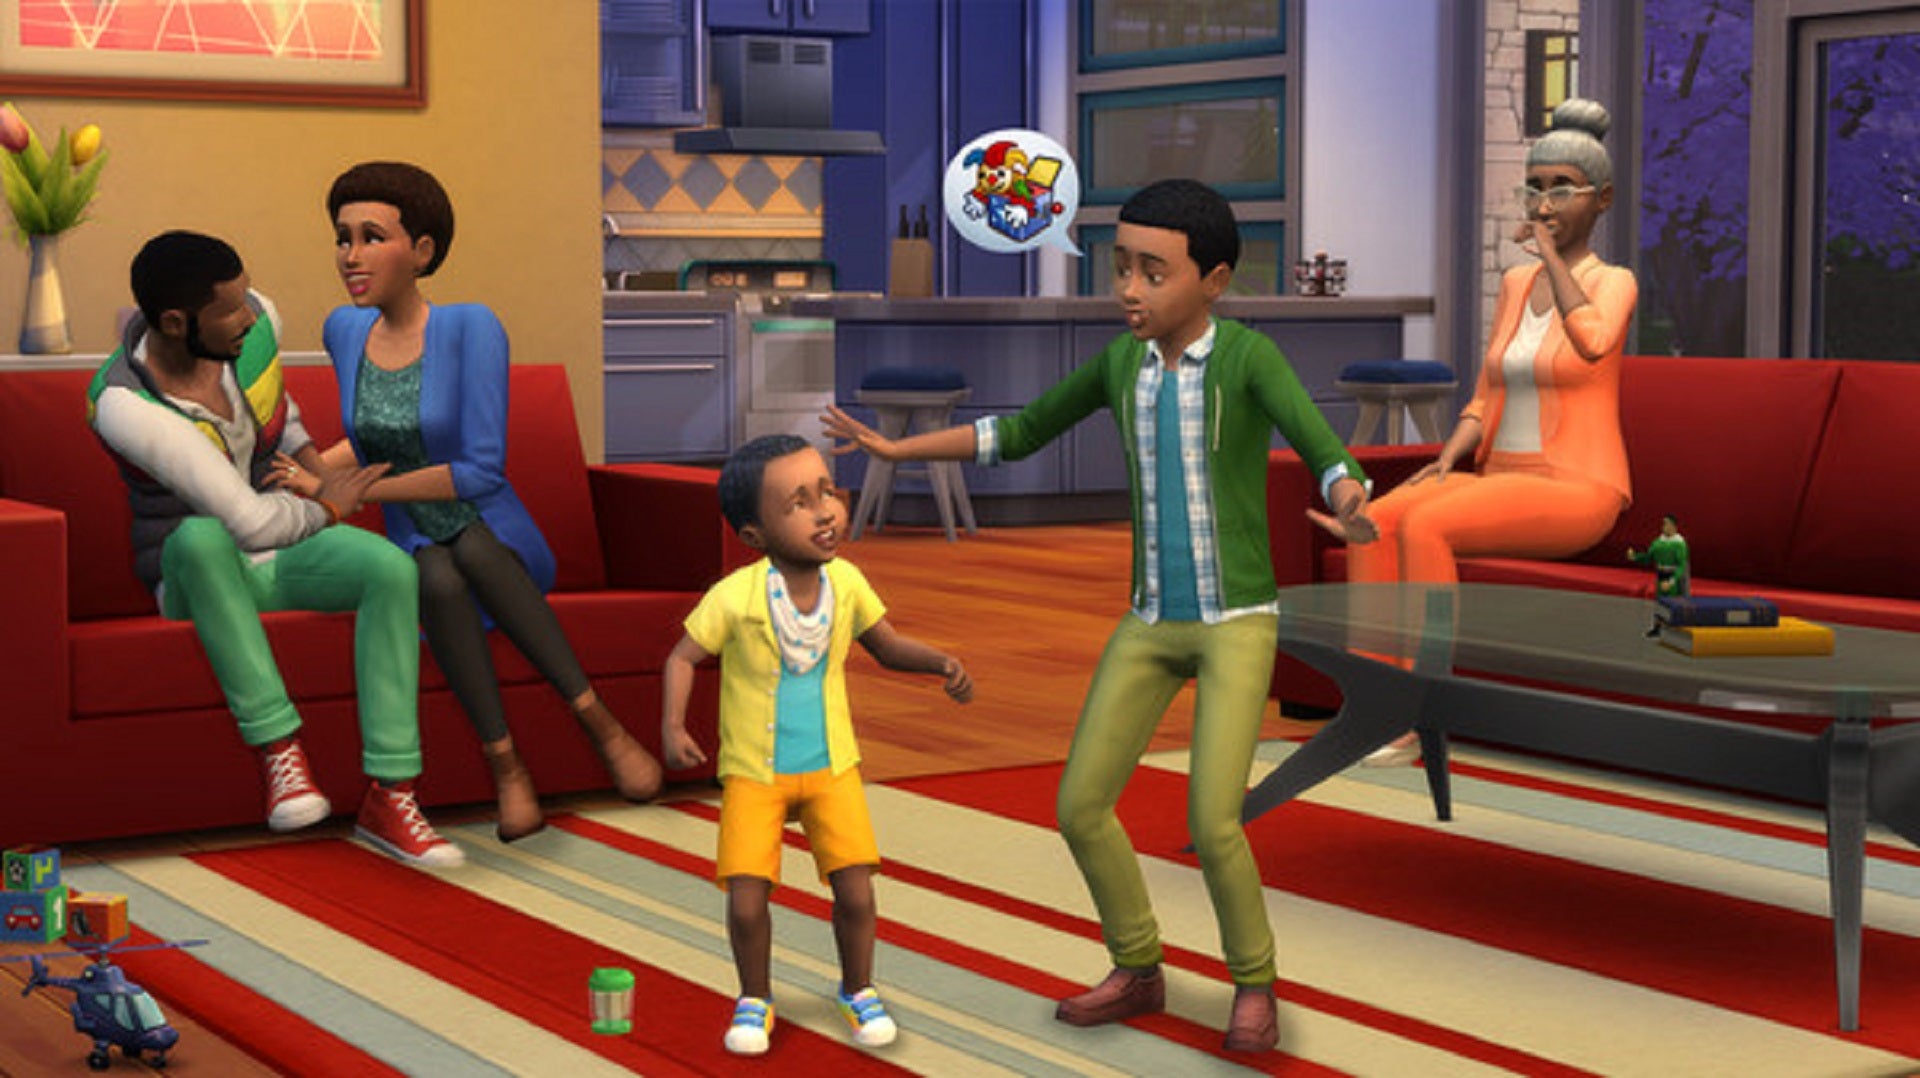 A family of five Sims, ranging in age from toddler to elder.